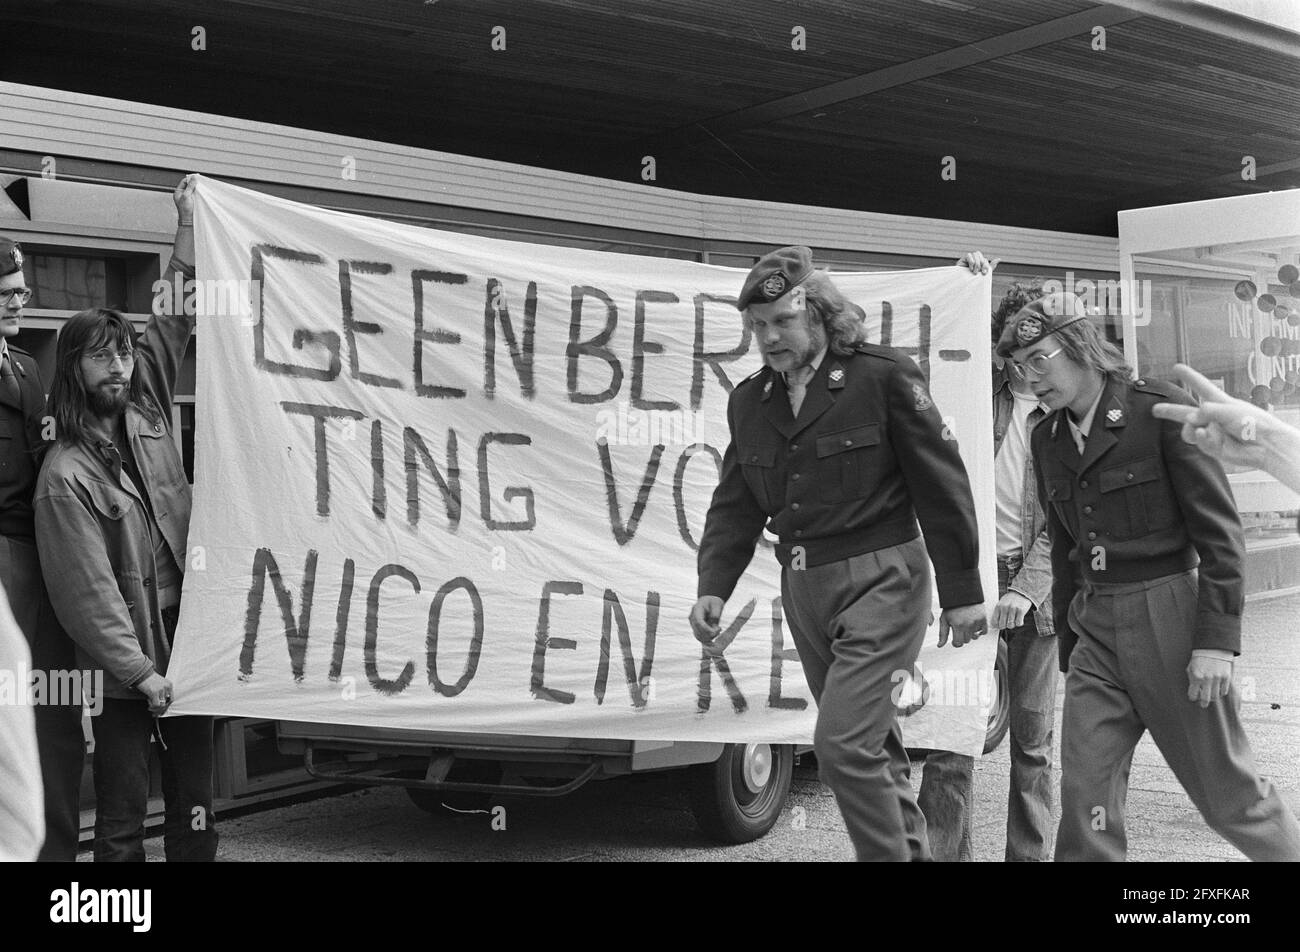 Two soldiers for court-martial Arnhem because of strike in Hohne ( West Germany ); Nico Bruijstens (with glasses) and Kees van Dijk by banner, June 13, 1974, MILITARY, Strikes, The Netherlands, 20th century press agency photo, news to remember, documentary, historic photography 1945-1990, visual stories, human history of the Twentieth Century, capturing moments in time Stock Photo